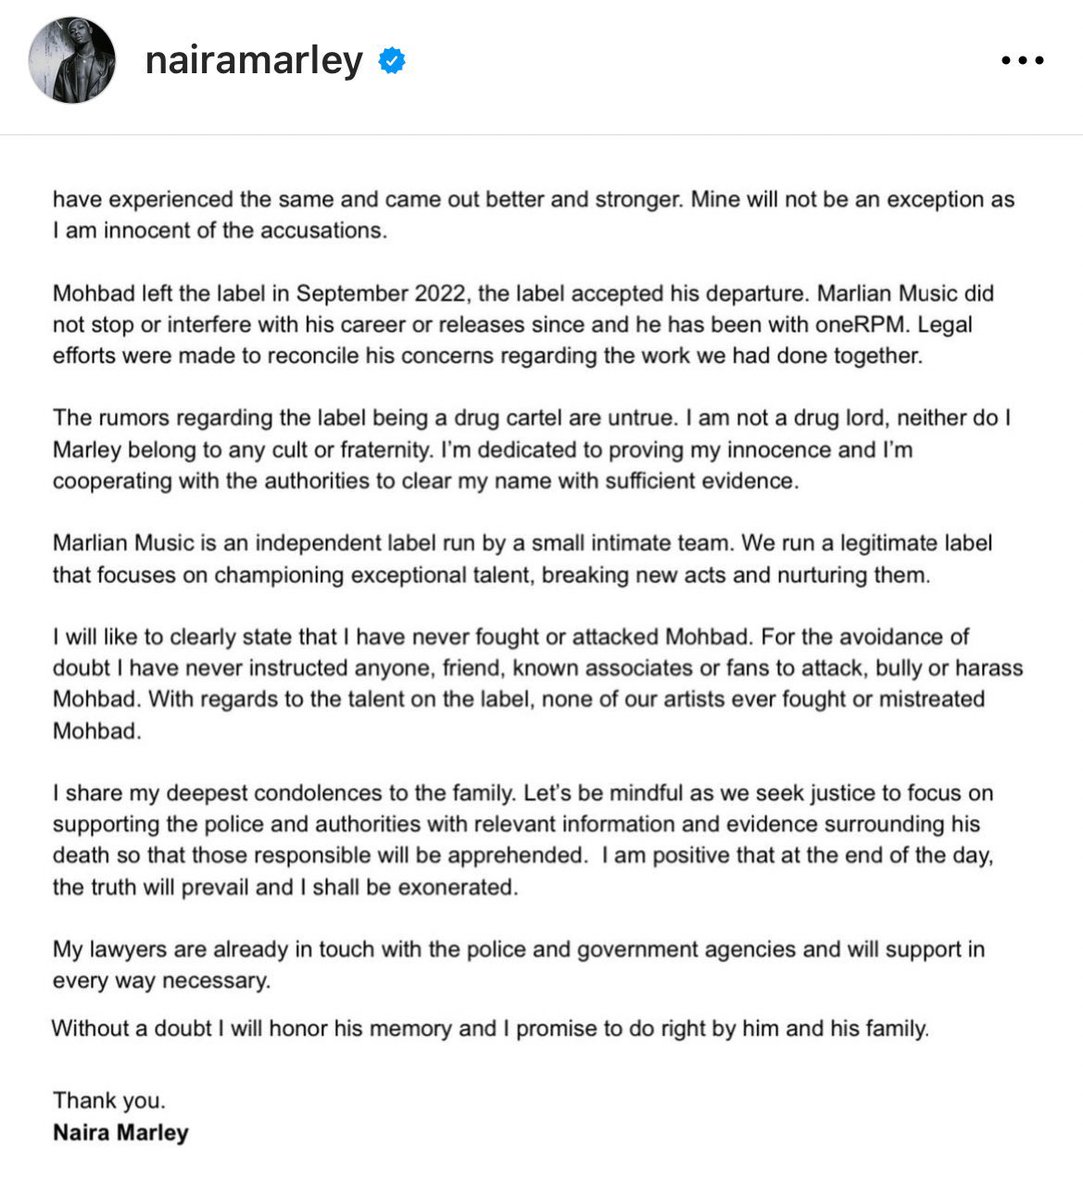 Naira Marley releases a new press statement on IG

No matter the plenty talk and explanation, No matter how long they try to twist this,we won’t back down until we get #Justice4Mohbad ✊🏾